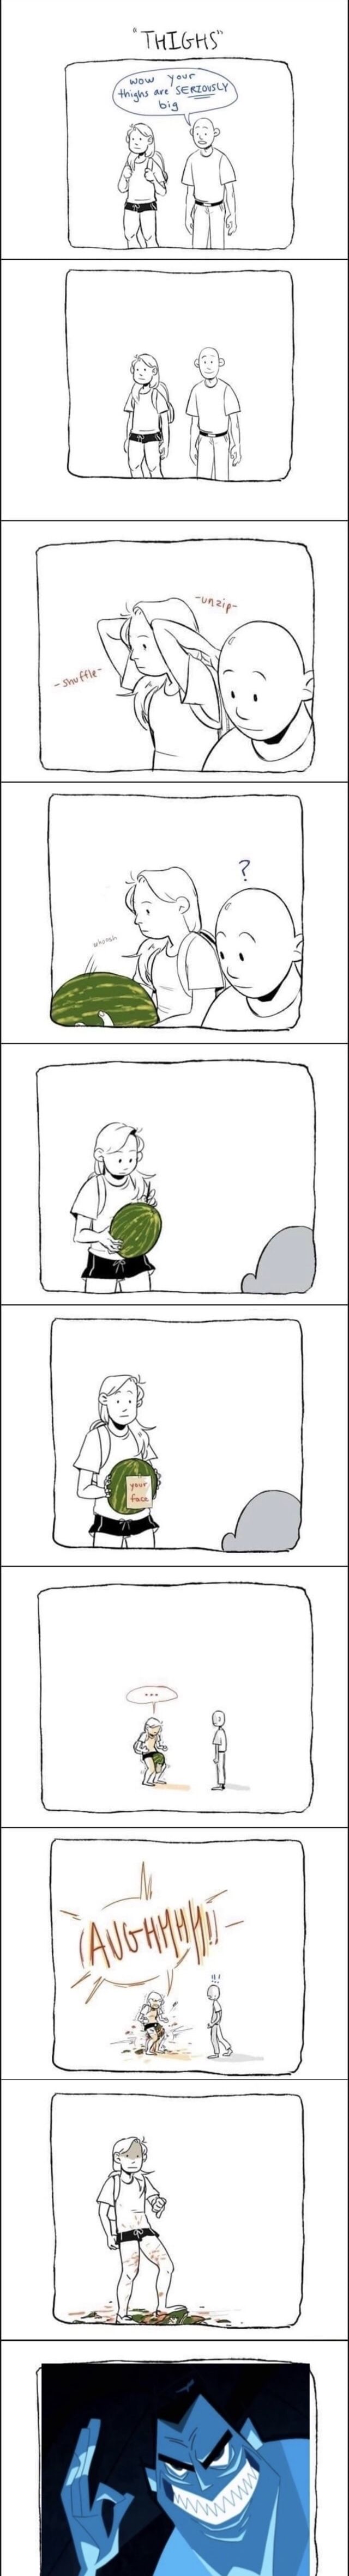 So she just keeps a watermelon on her at all times?